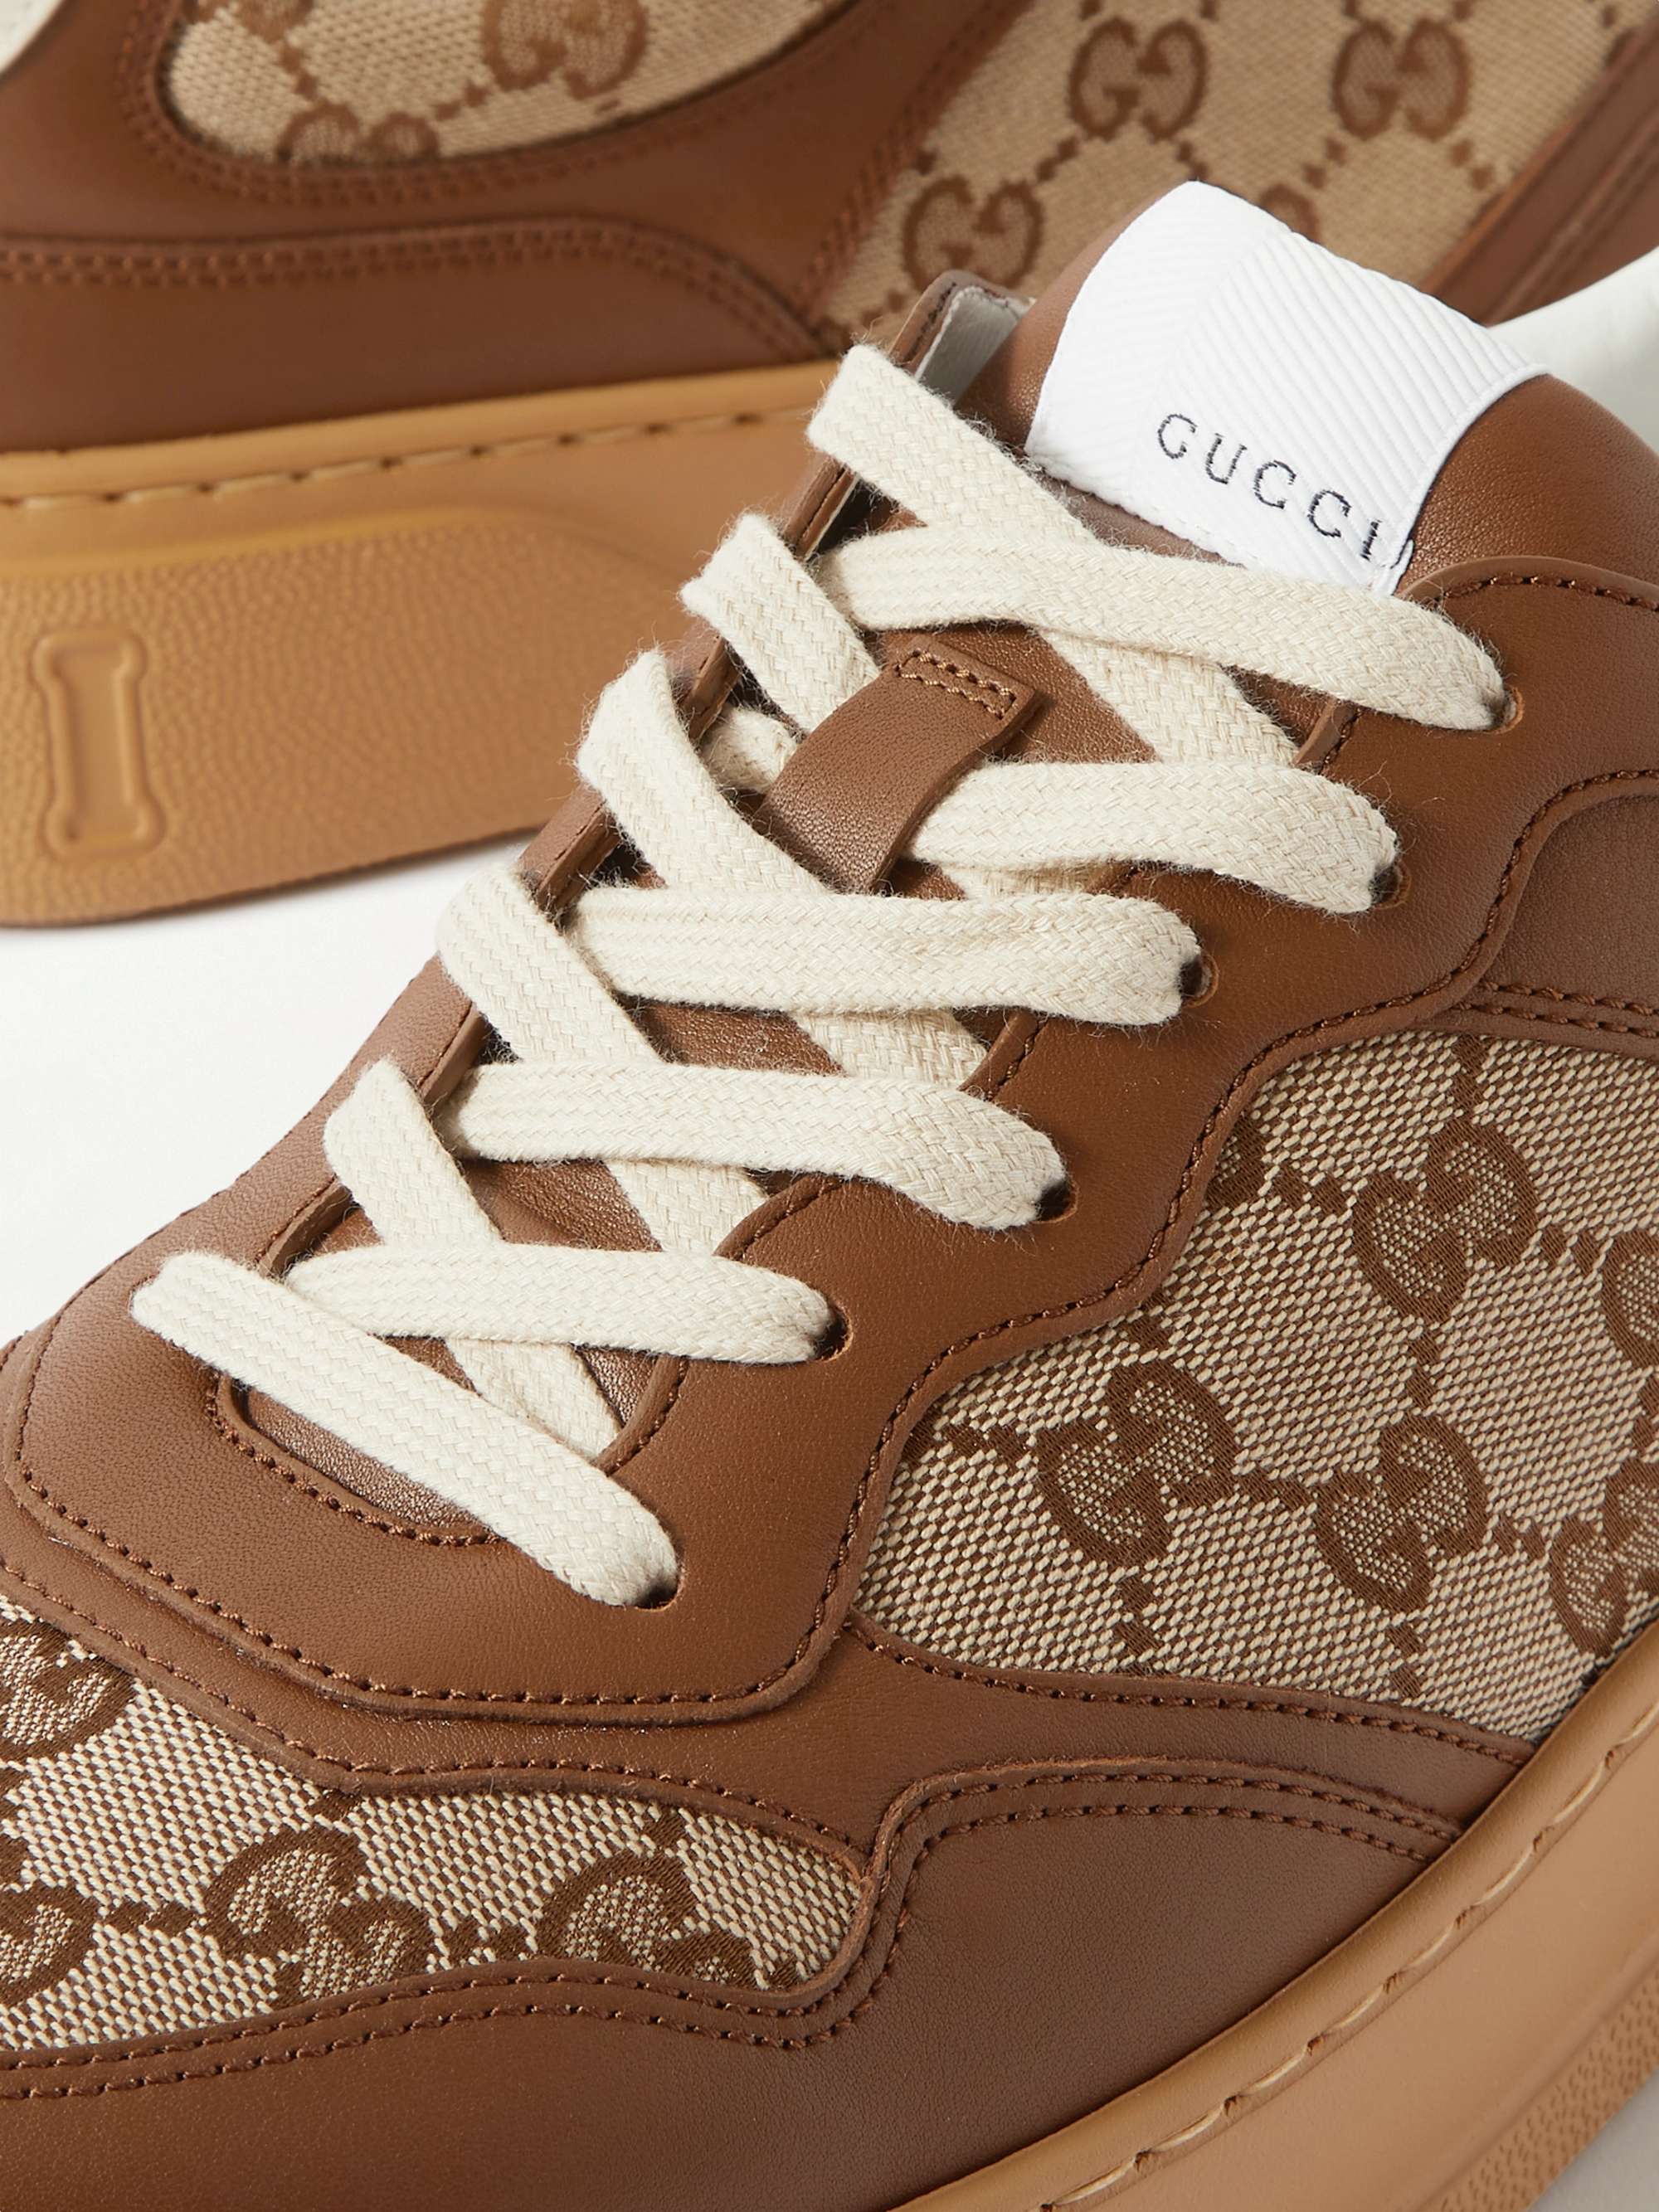 GUCCI Jive Monogrammed Canvas and Leather Sneakers